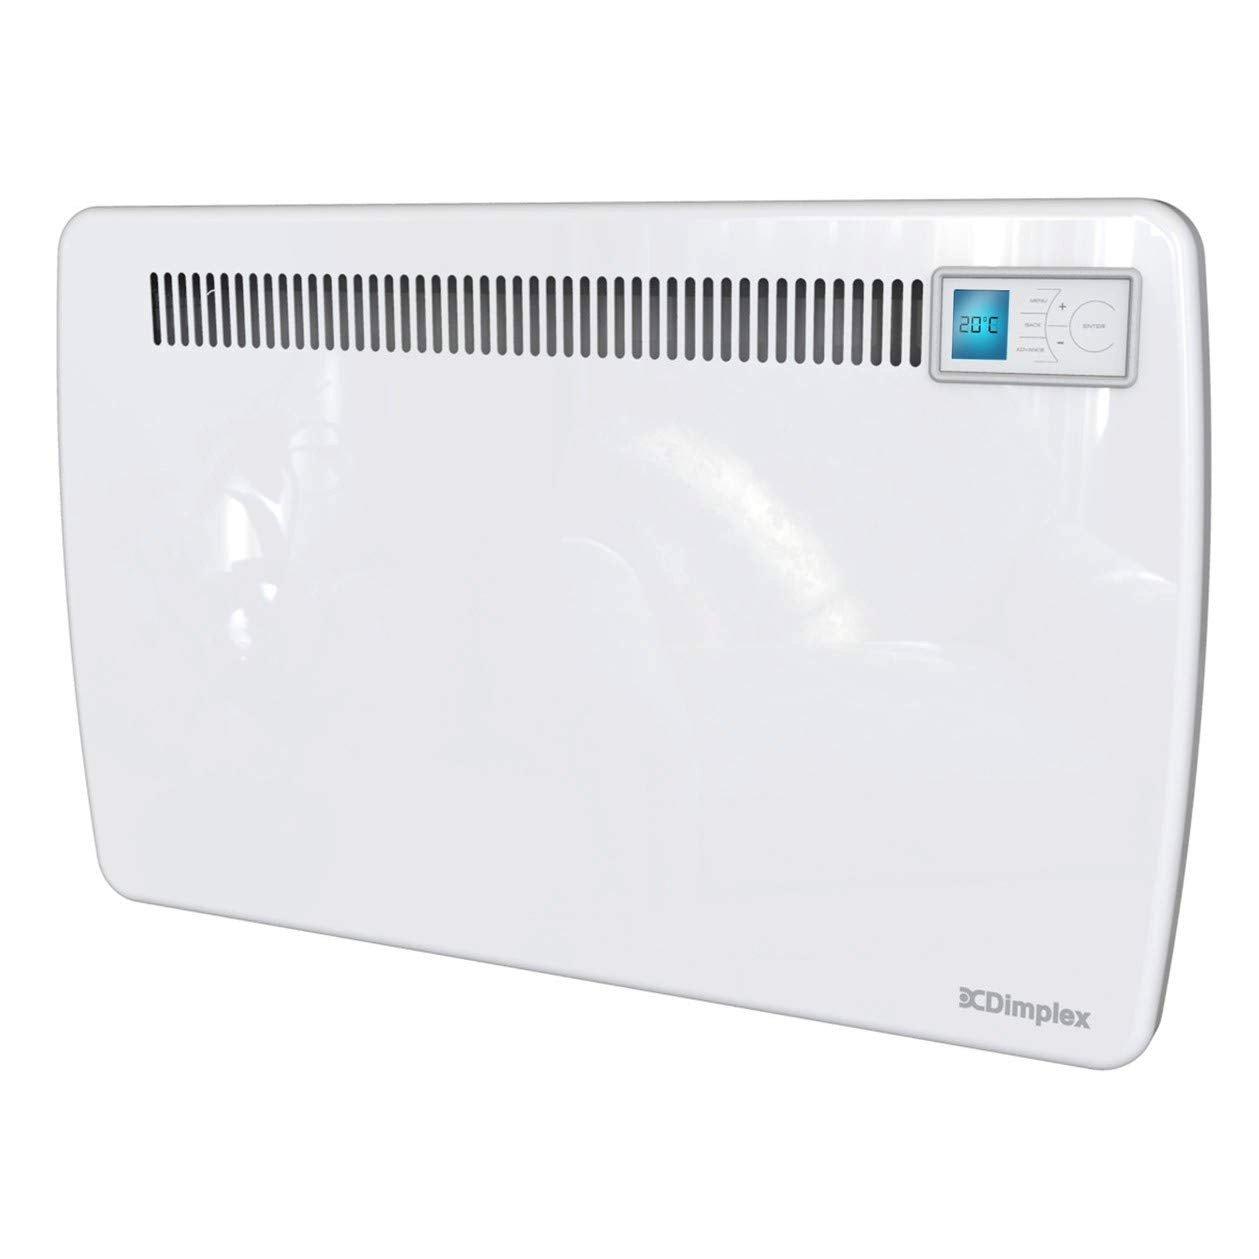 'LST050' 500W Low Surface Temperature Electric Heater